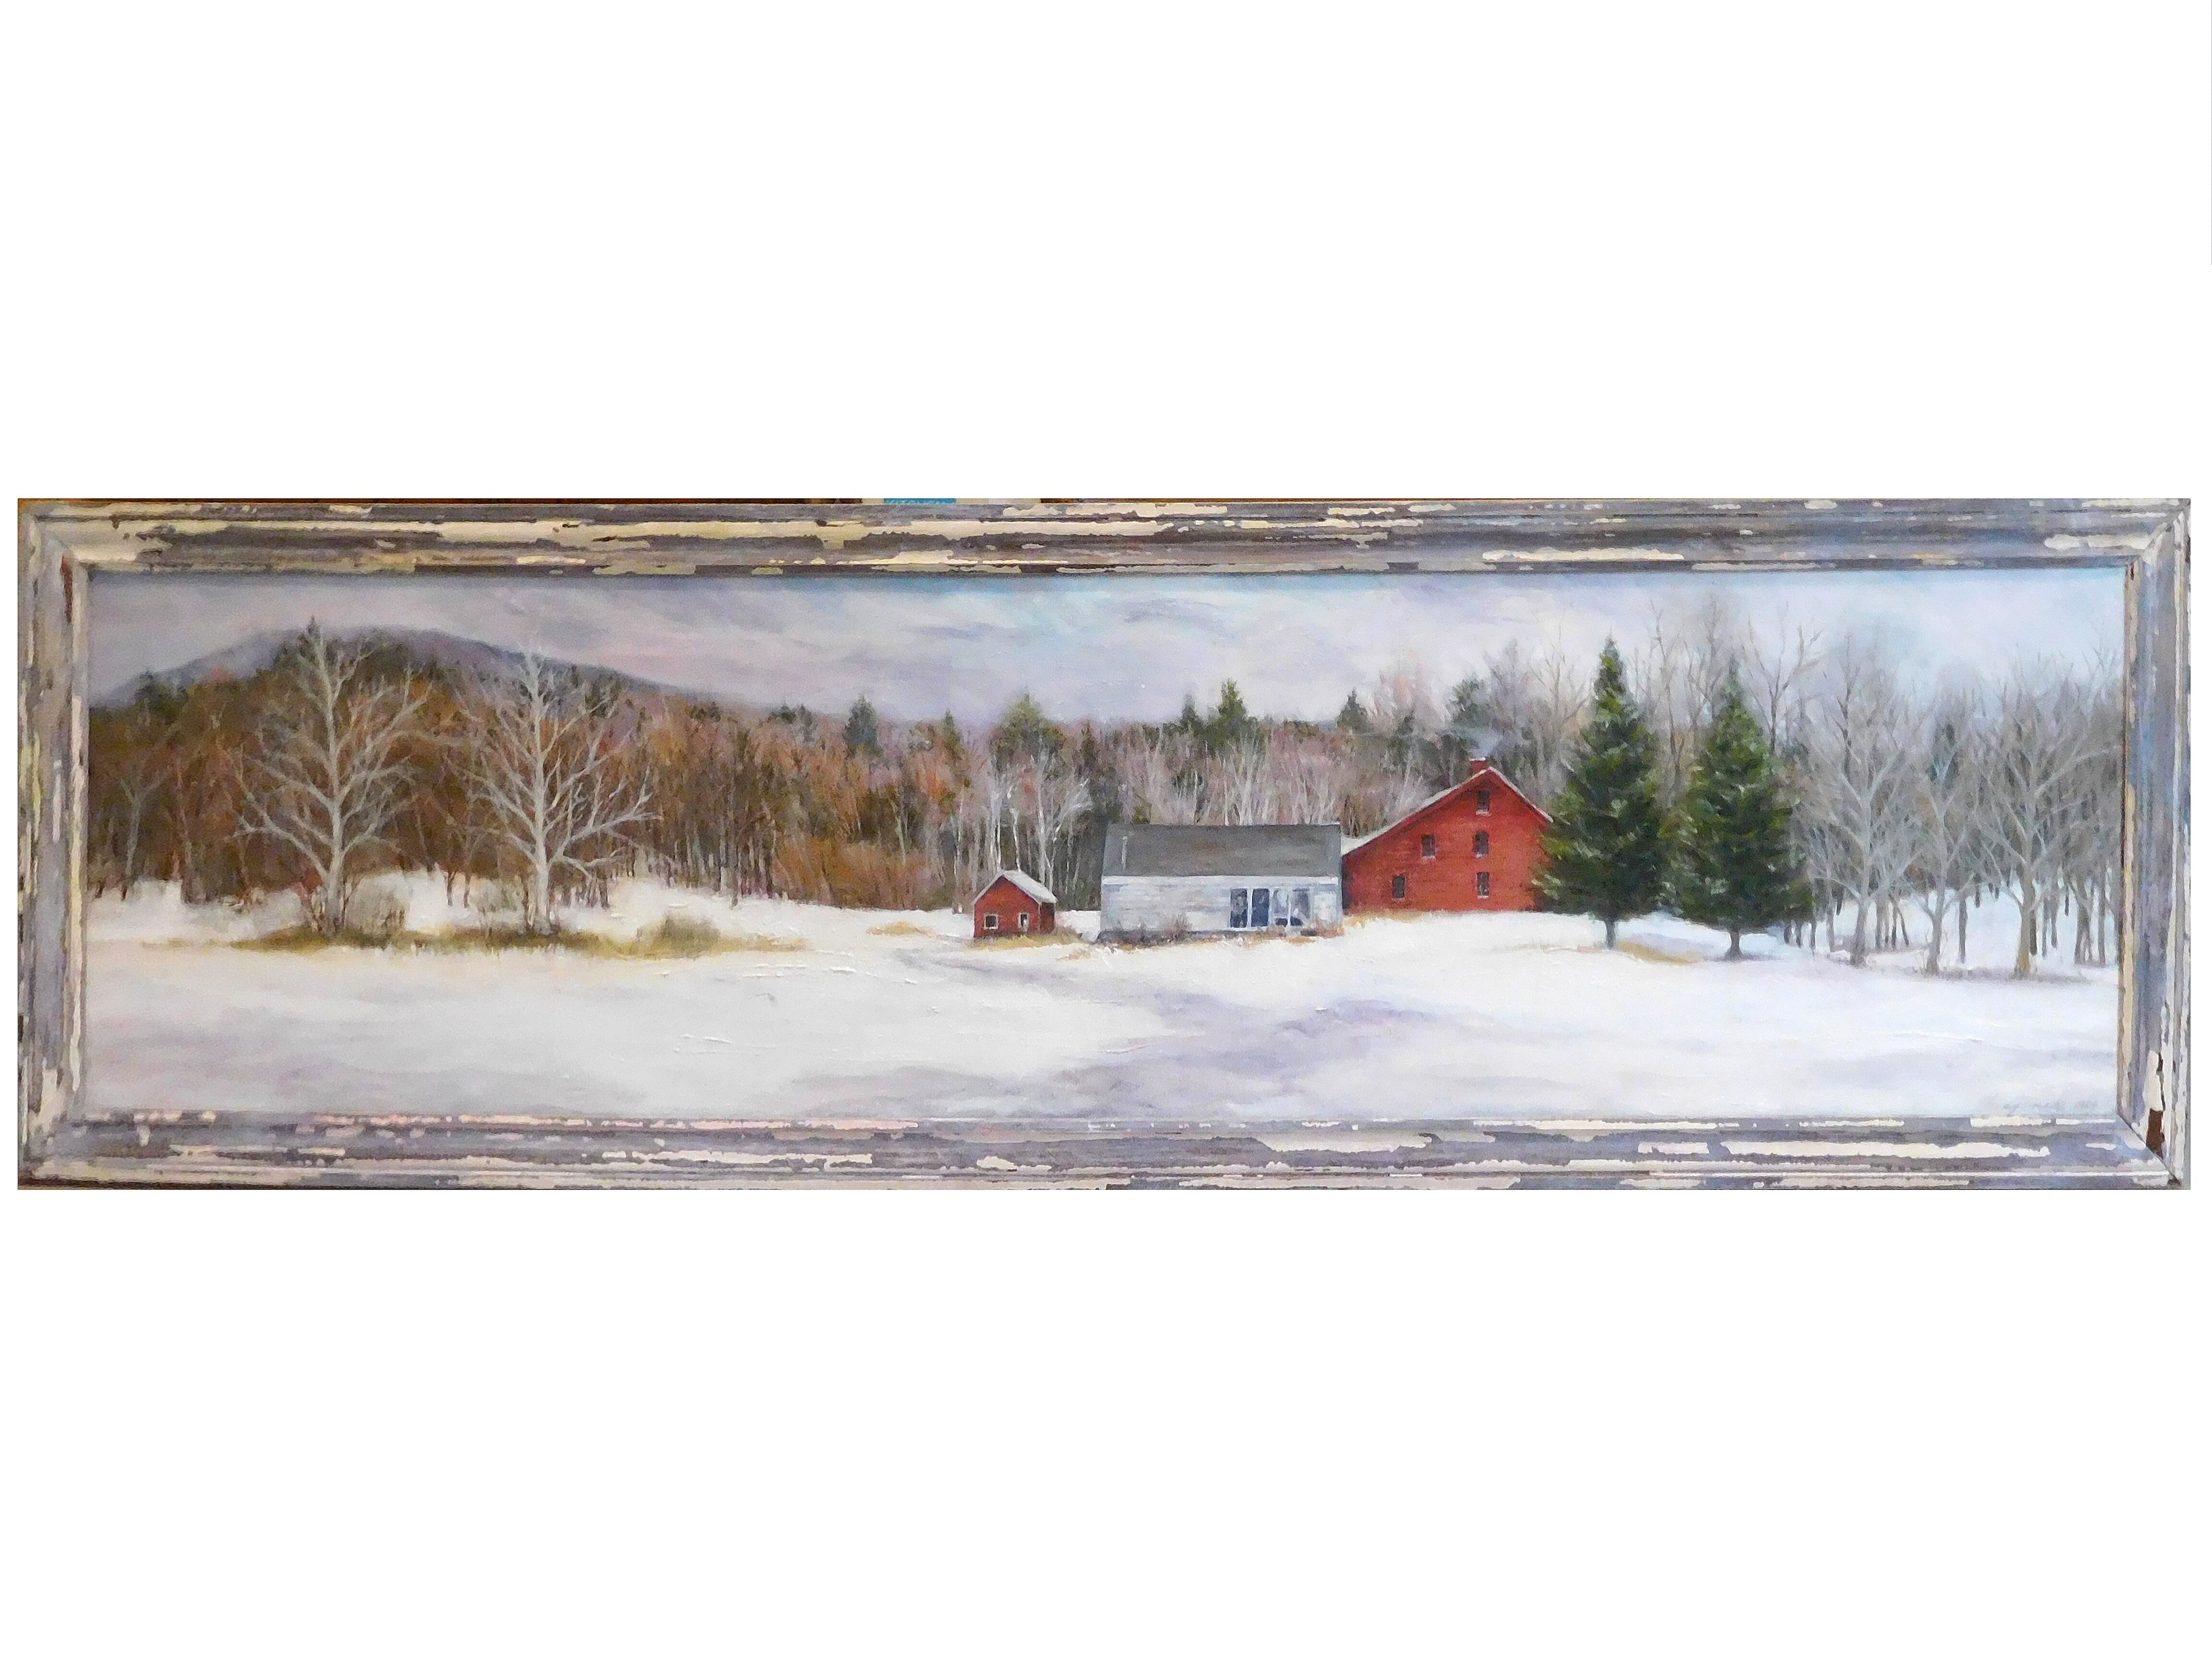 John Gamache; On The Way To Peterbourgh Nh, 2005, Original Painting Oil, 48 x 12 . Artwork description: 241 All My Paintings Have an Emotional Base and come from the Soul and love for nature and the the past...